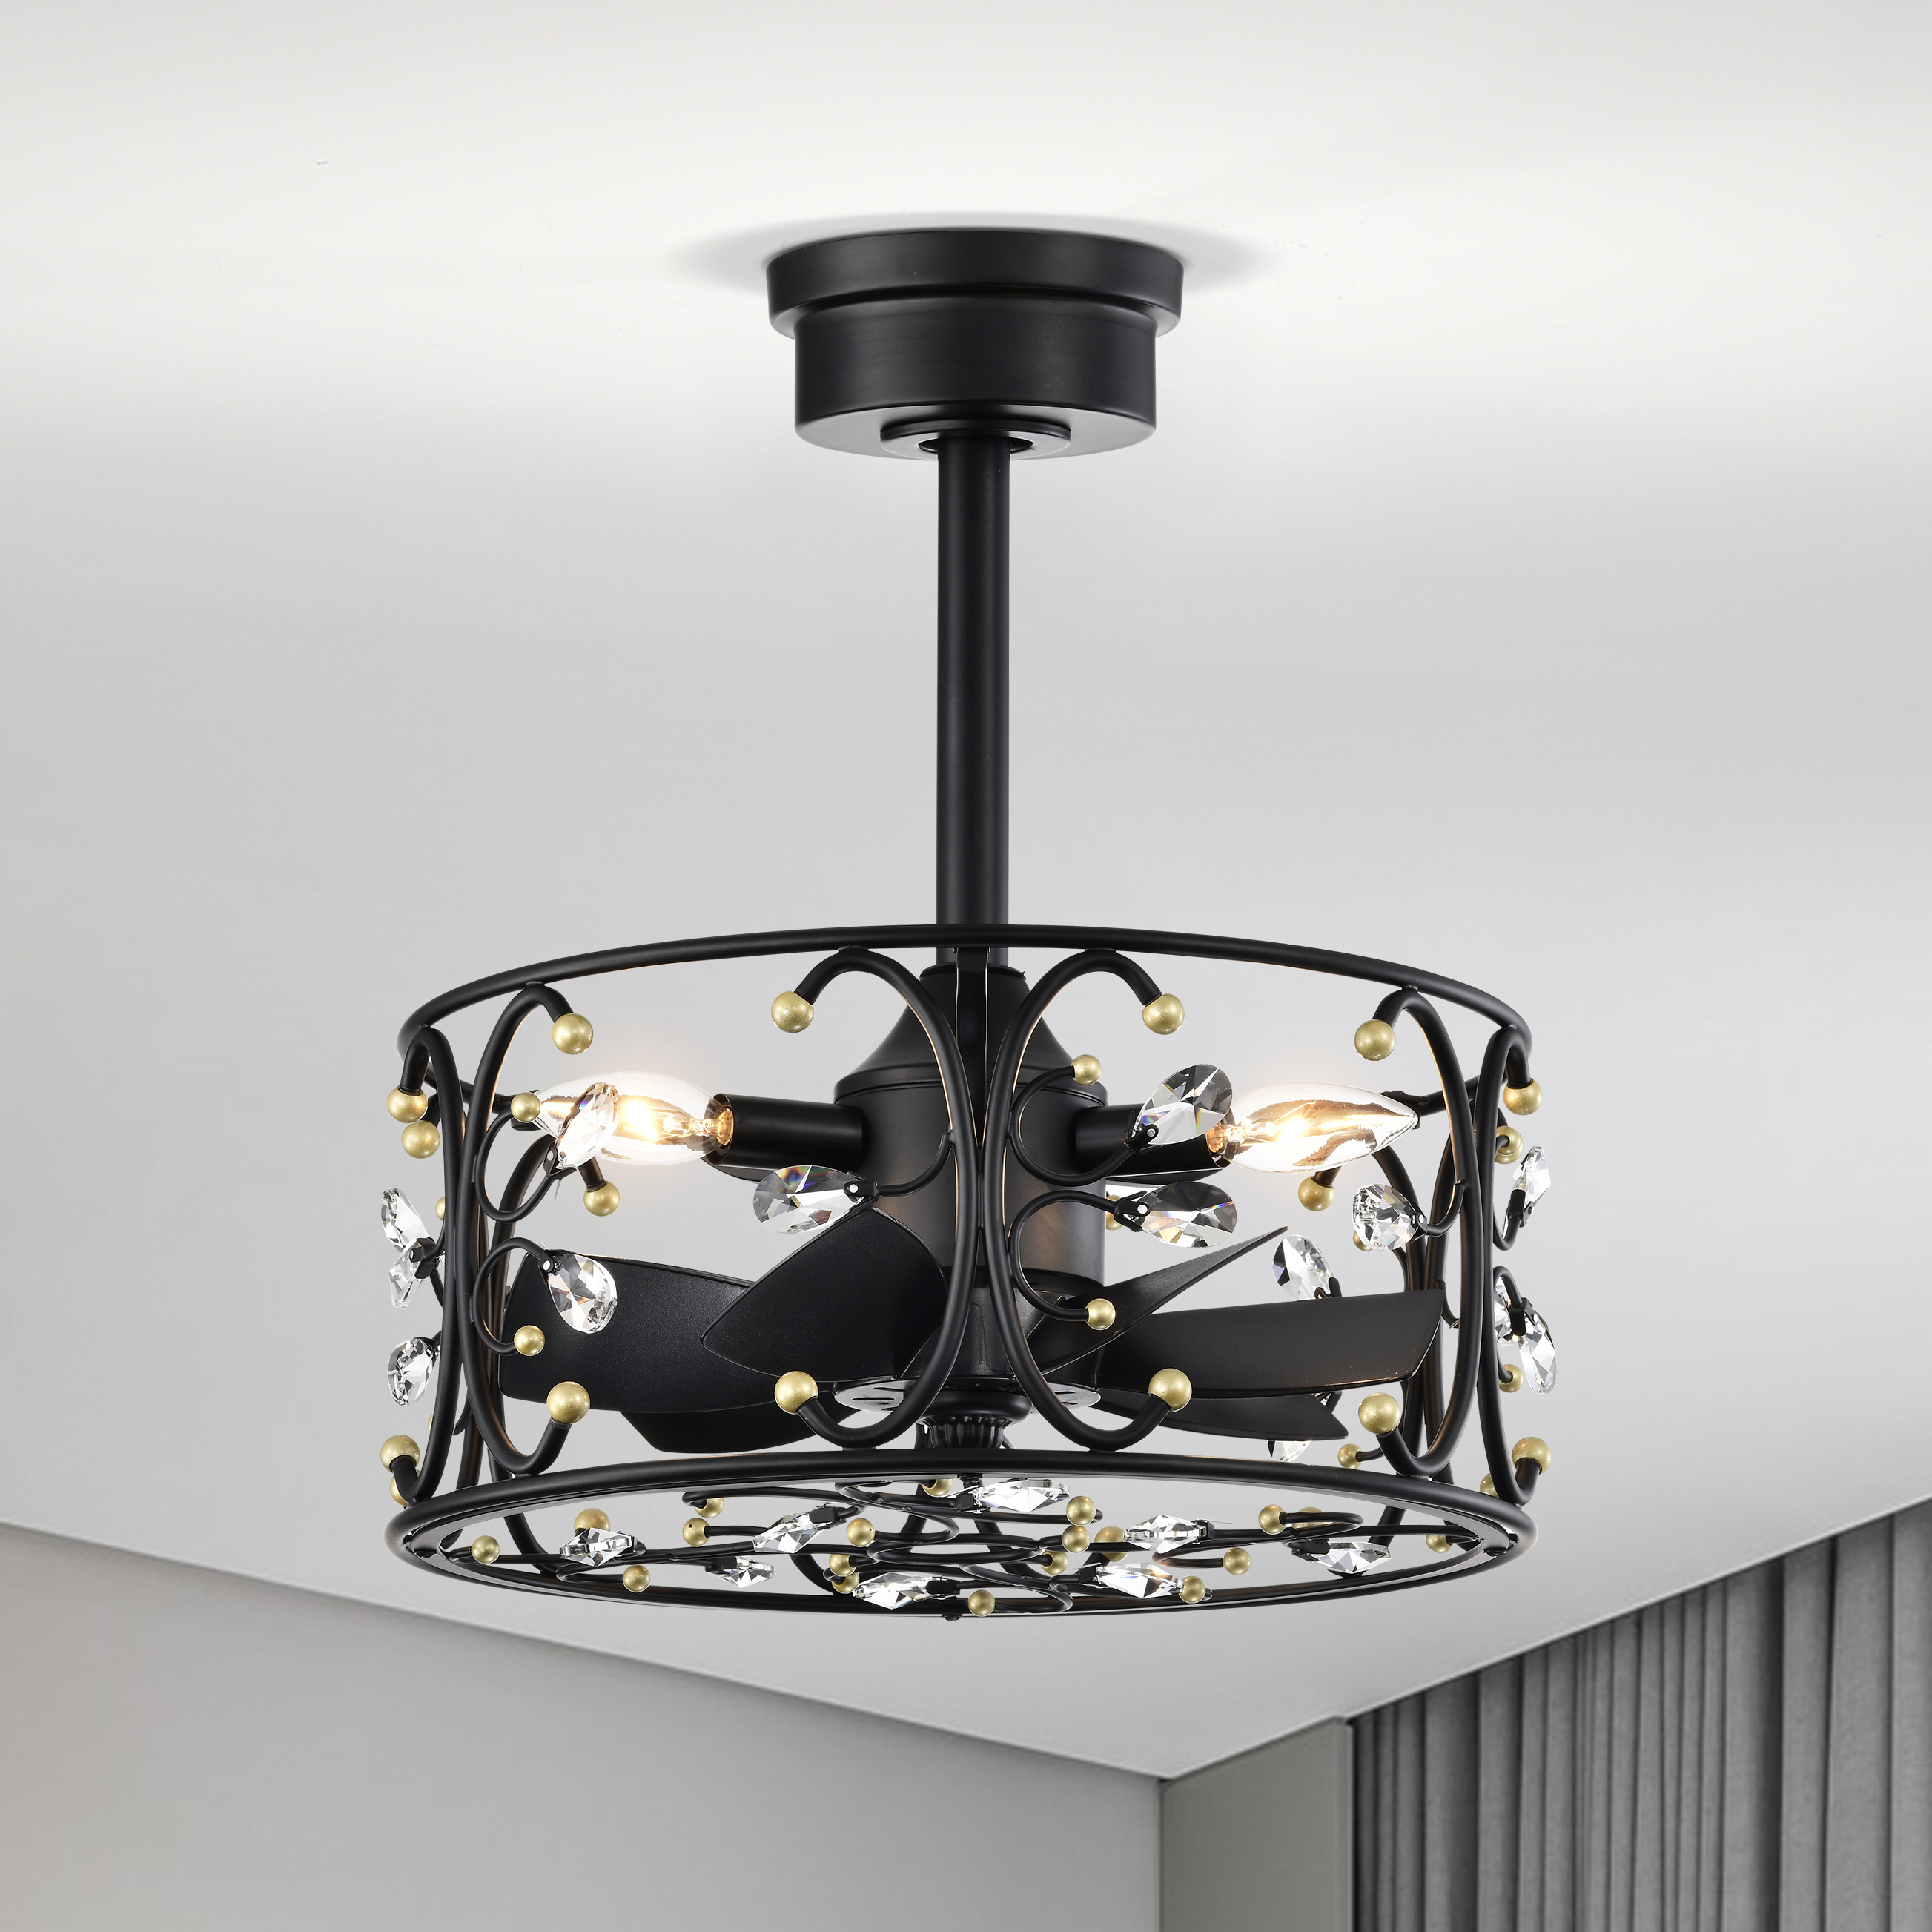 Albina 15.7 in. 3-Light Indoor Matte Black and Gold Finish Ceiling Fan with Light Kit